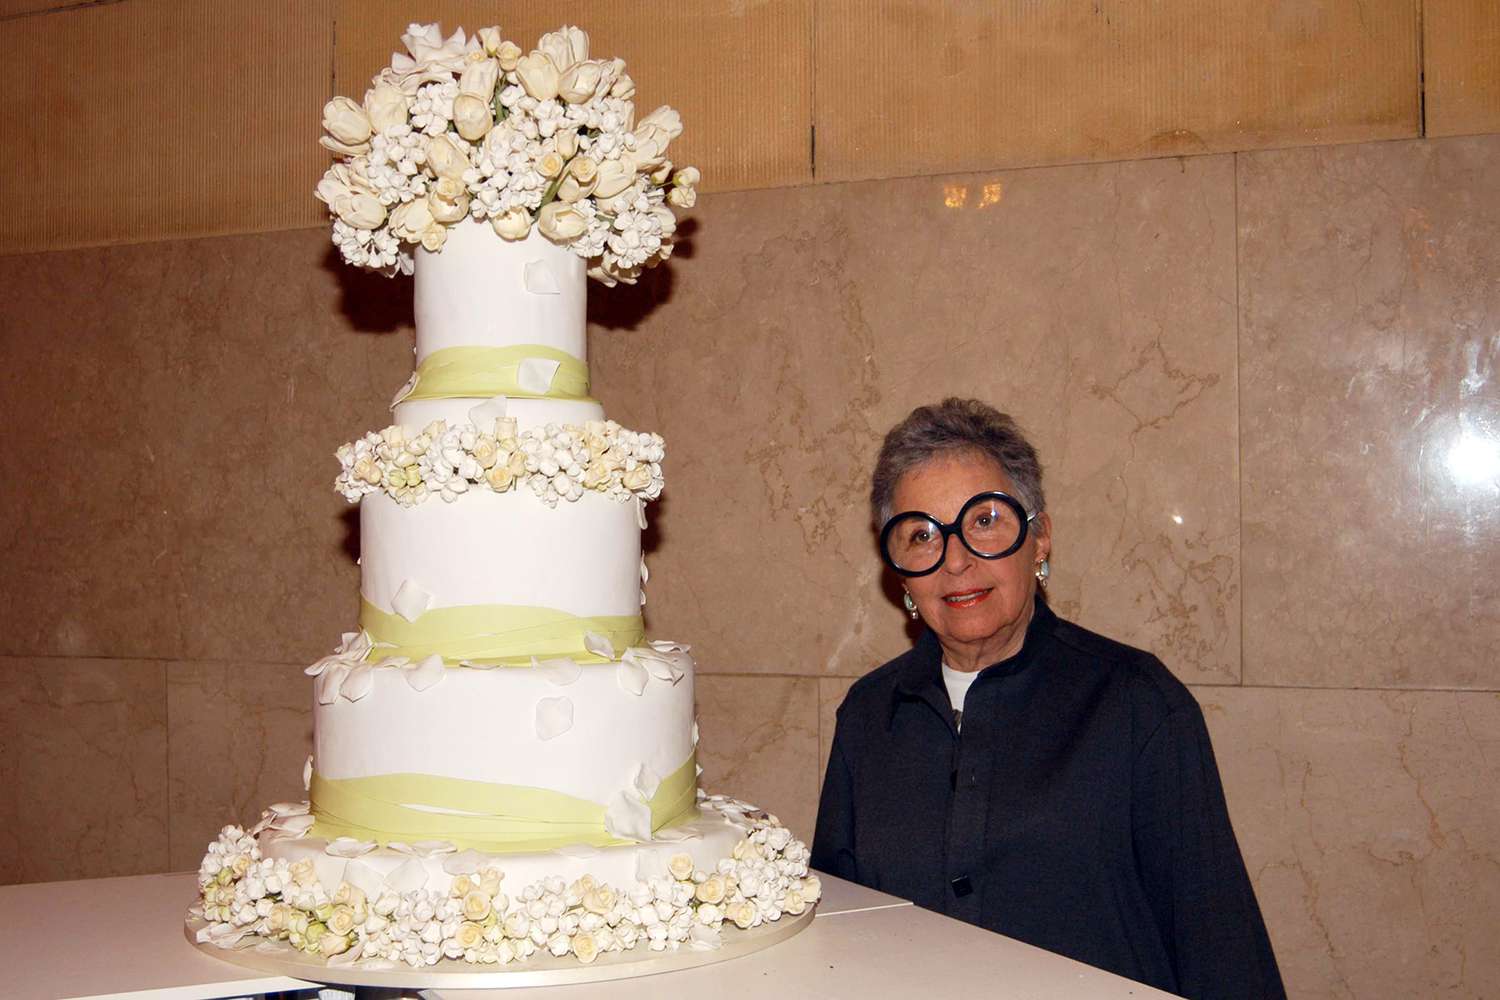 NEW YORK CITY, NY - MAY 24: Sylvia Weinstock attends Brides Magazine and Martini & Rossi Asti Announce Cakewalk at Grand Central Terminal on May 24, 2005 in New York City. (Photo by Sheri Whitko/Patrick McMullan via Getty Images)